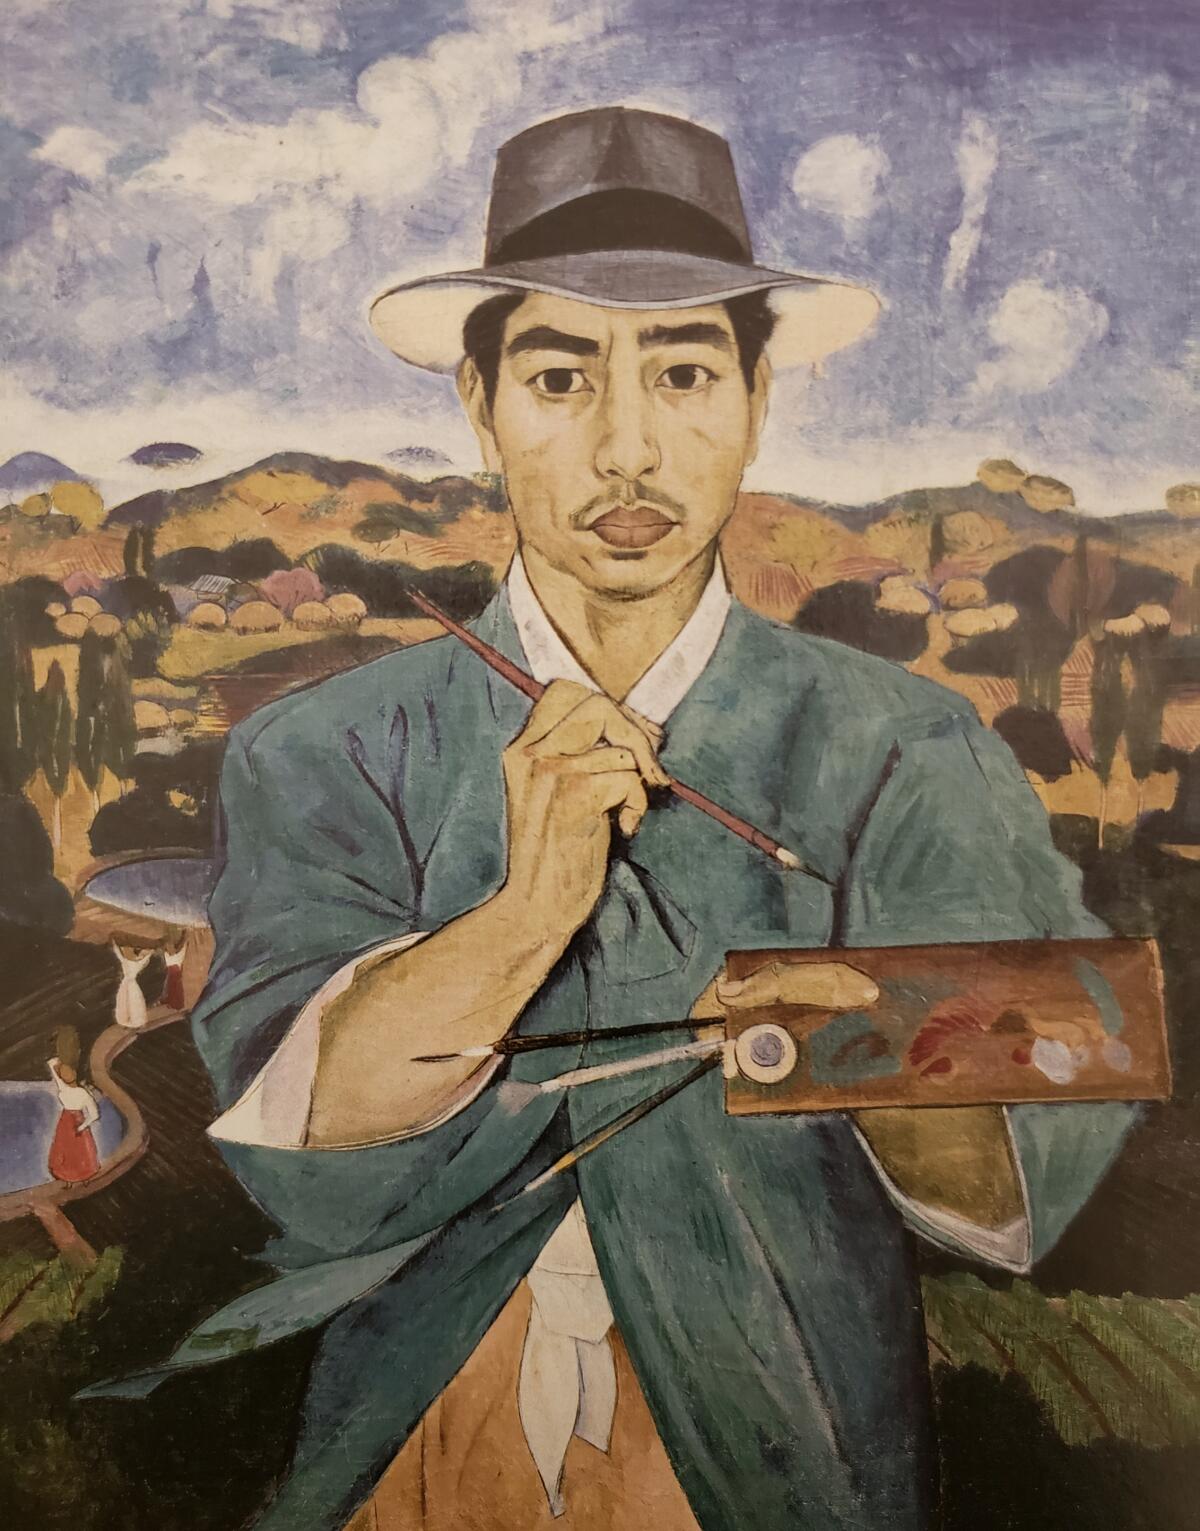 Portrait of a man in a fedora holding an artist's palette. In the background are hills and blue sky.